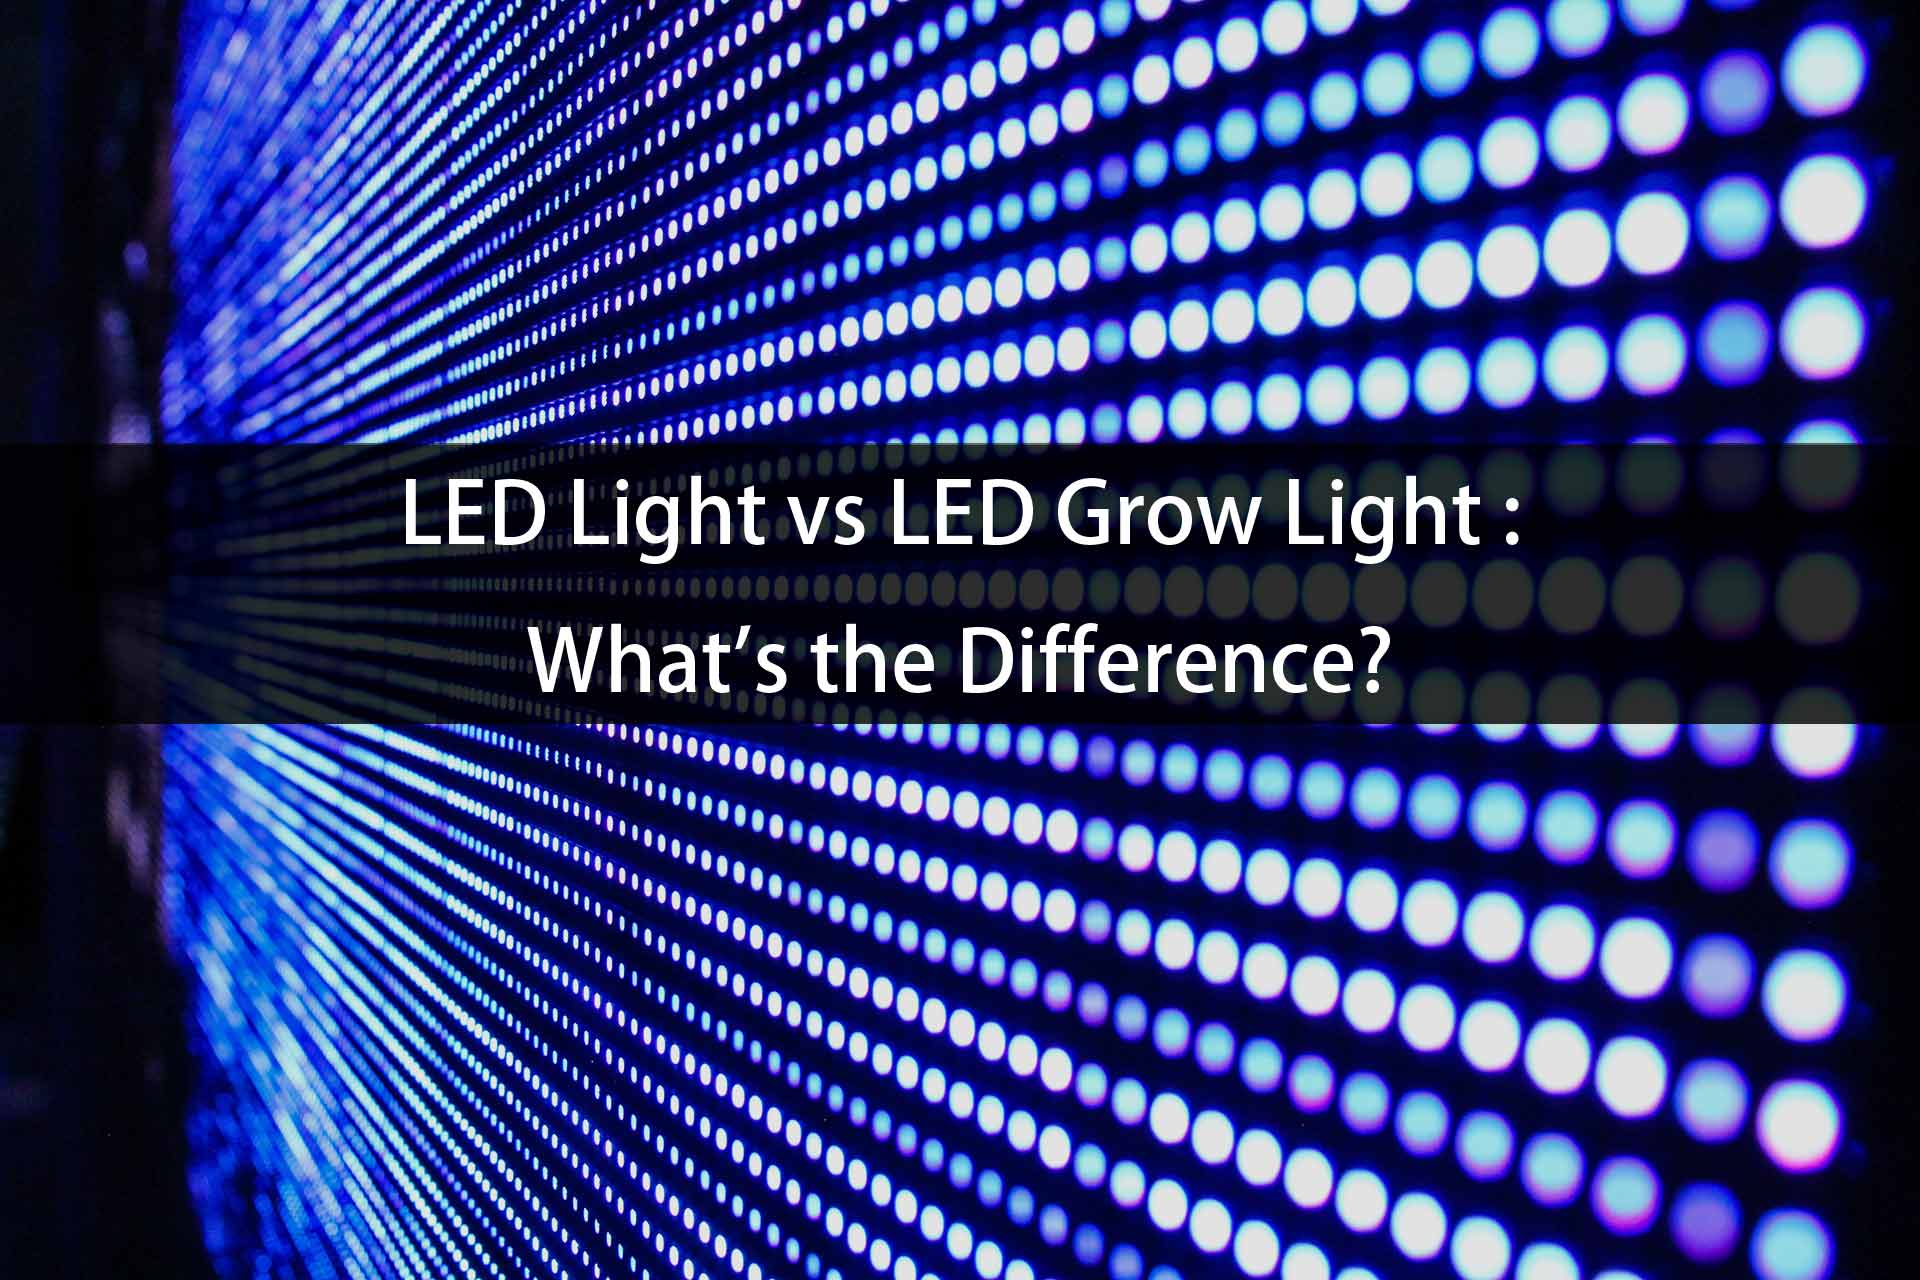 LED Light vs LED Grow Light : What's the difference?